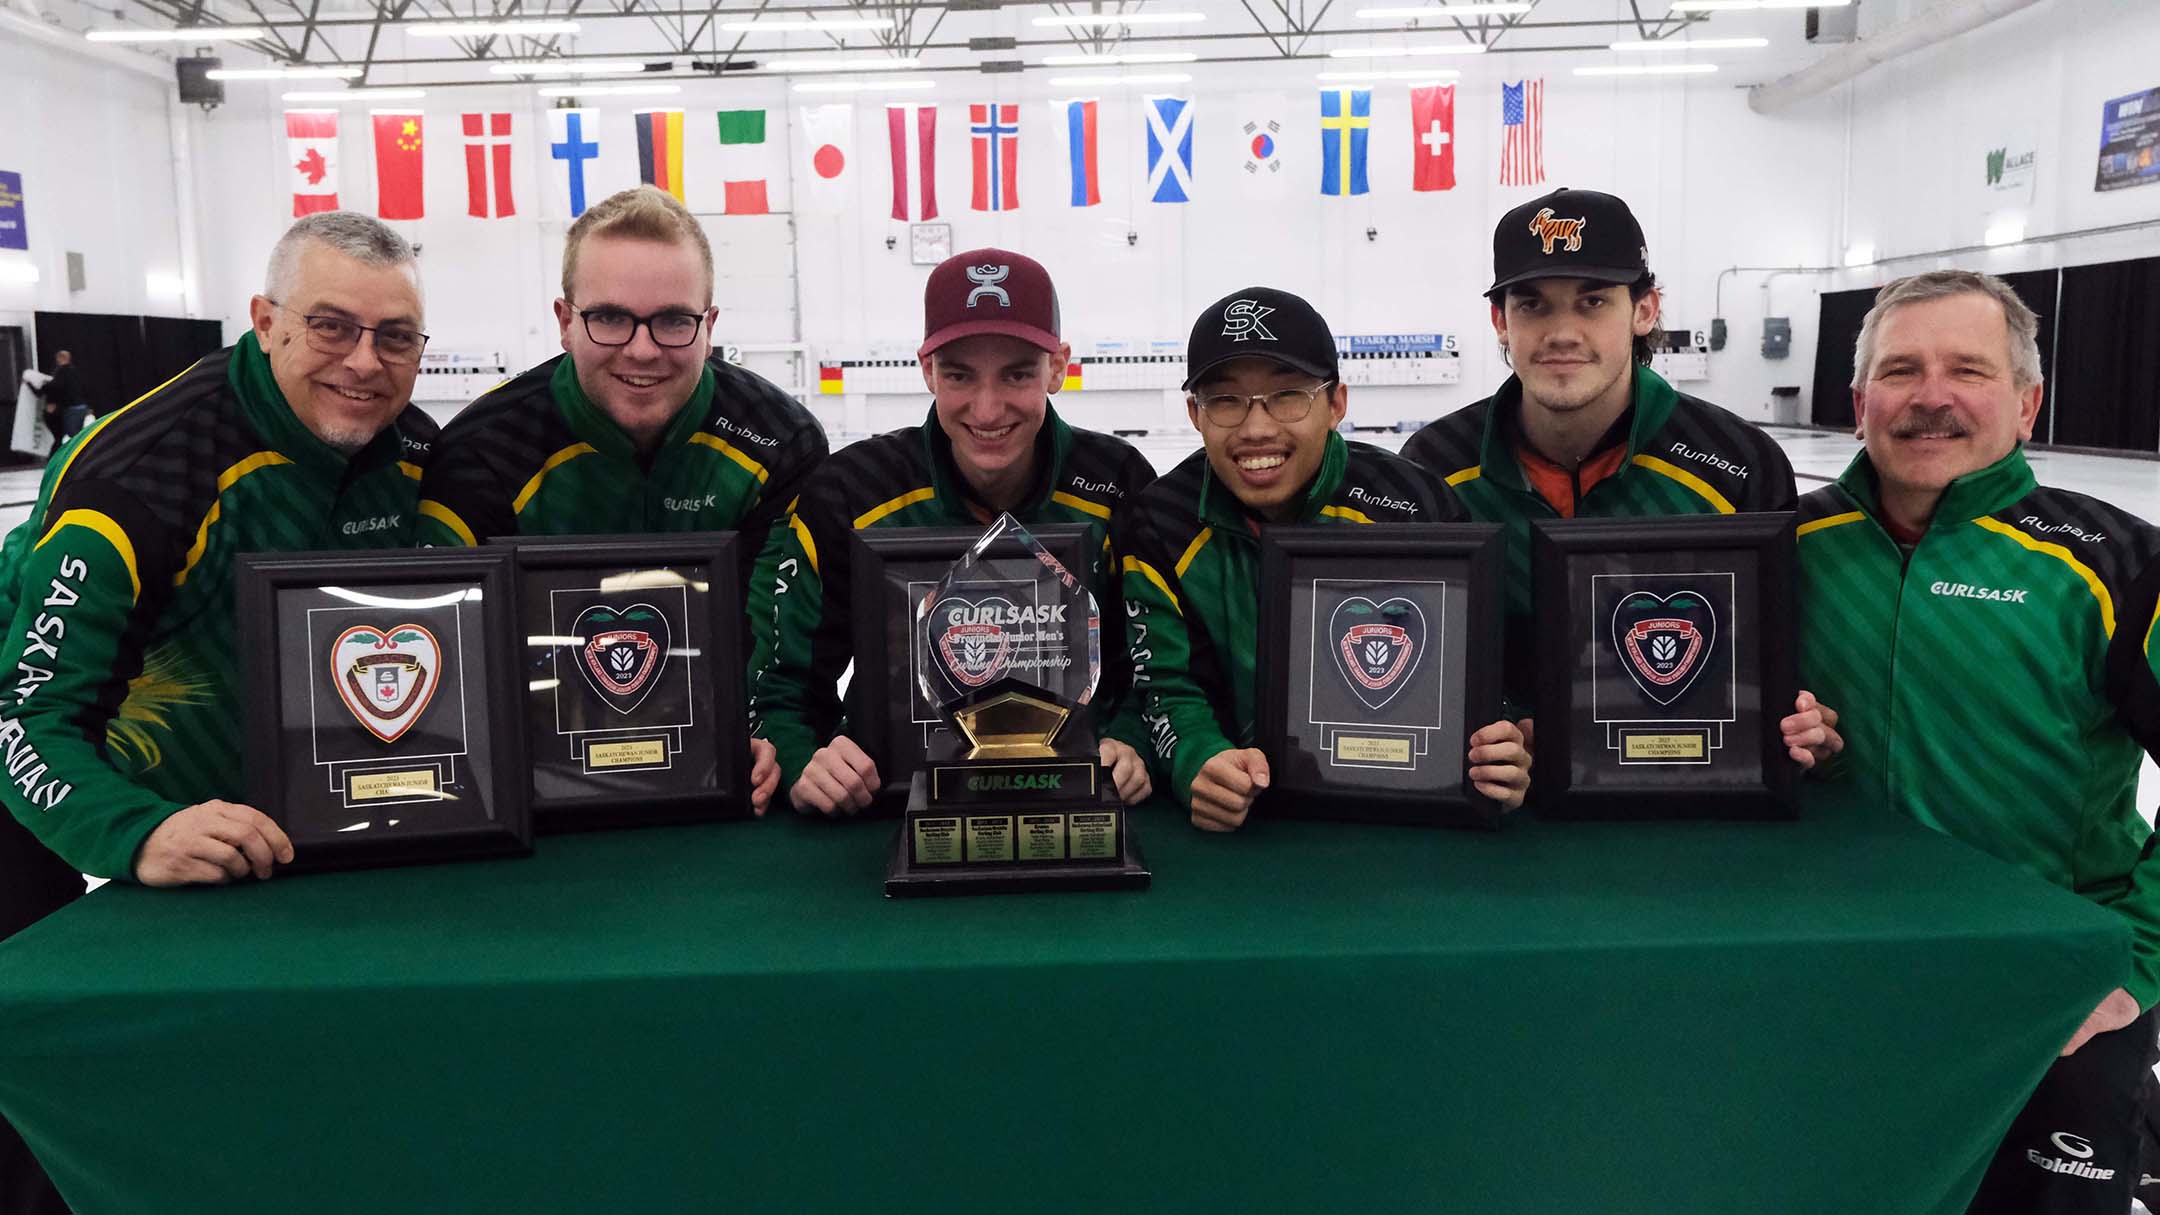 Team Ede with their championship green jackets. Moskaluke left, Hom fourth from left. (Photo submitted)